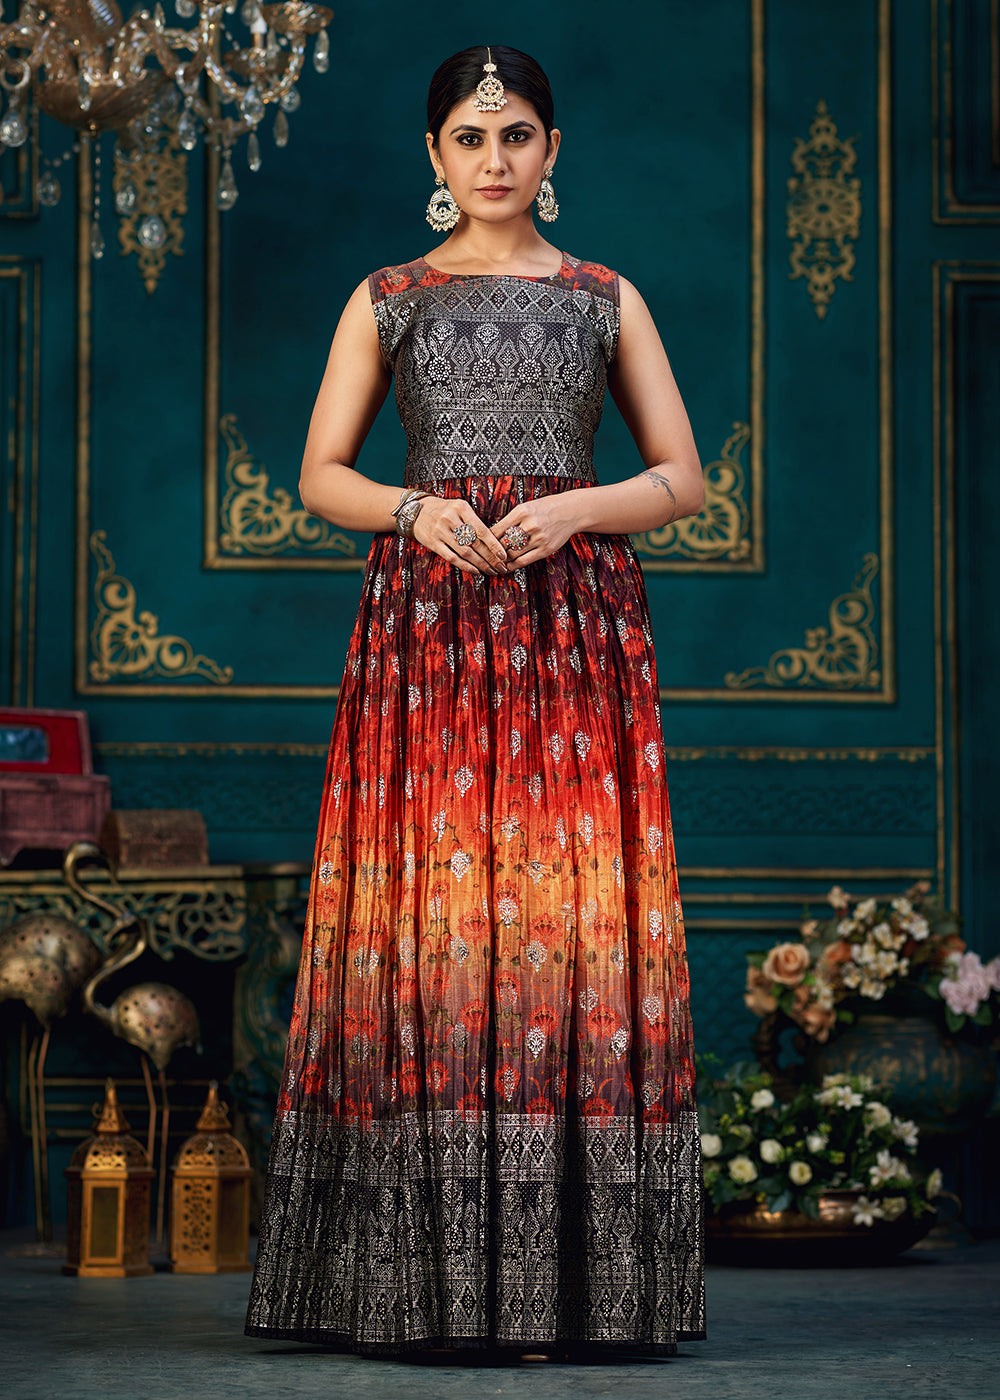 Buy Now Lovely Multicolor Digital Foil Printed Ready to Wear Gown Online in USA, UK, Australia, New Zealand, Canada & Worldwide at Empress Clothing.